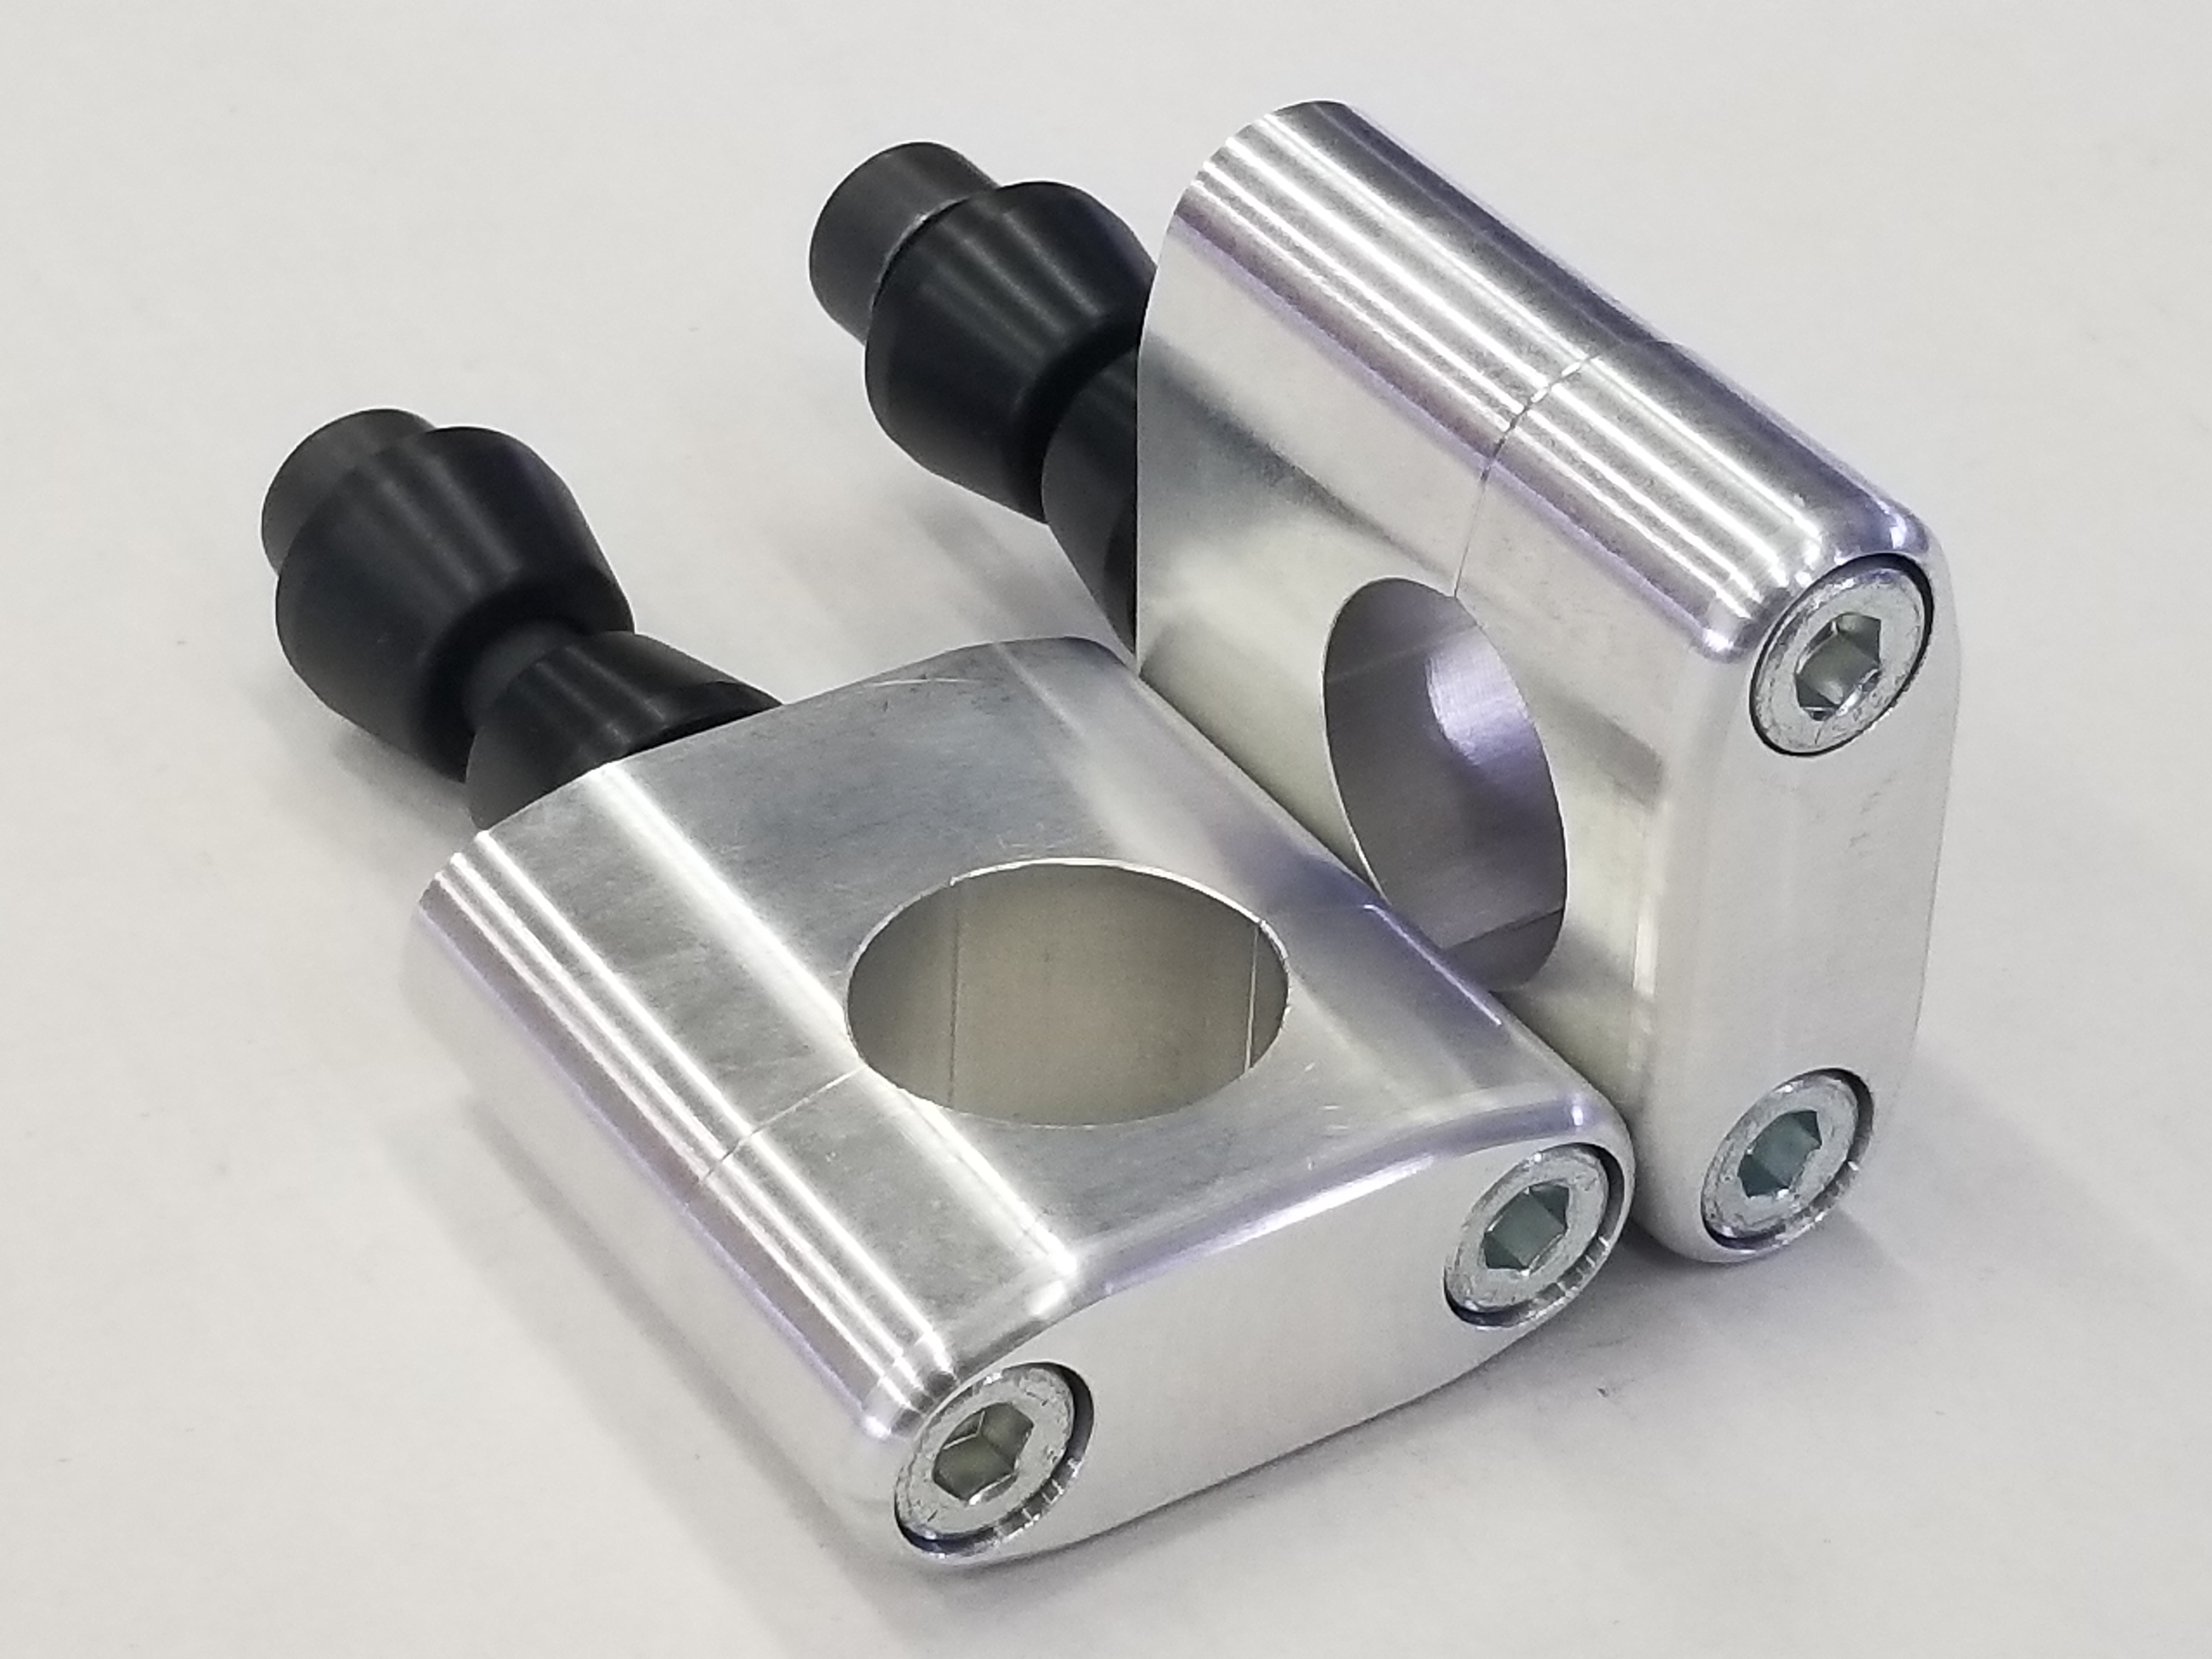 1 1/8 bar mounts for stock clamps - Click Image to Close